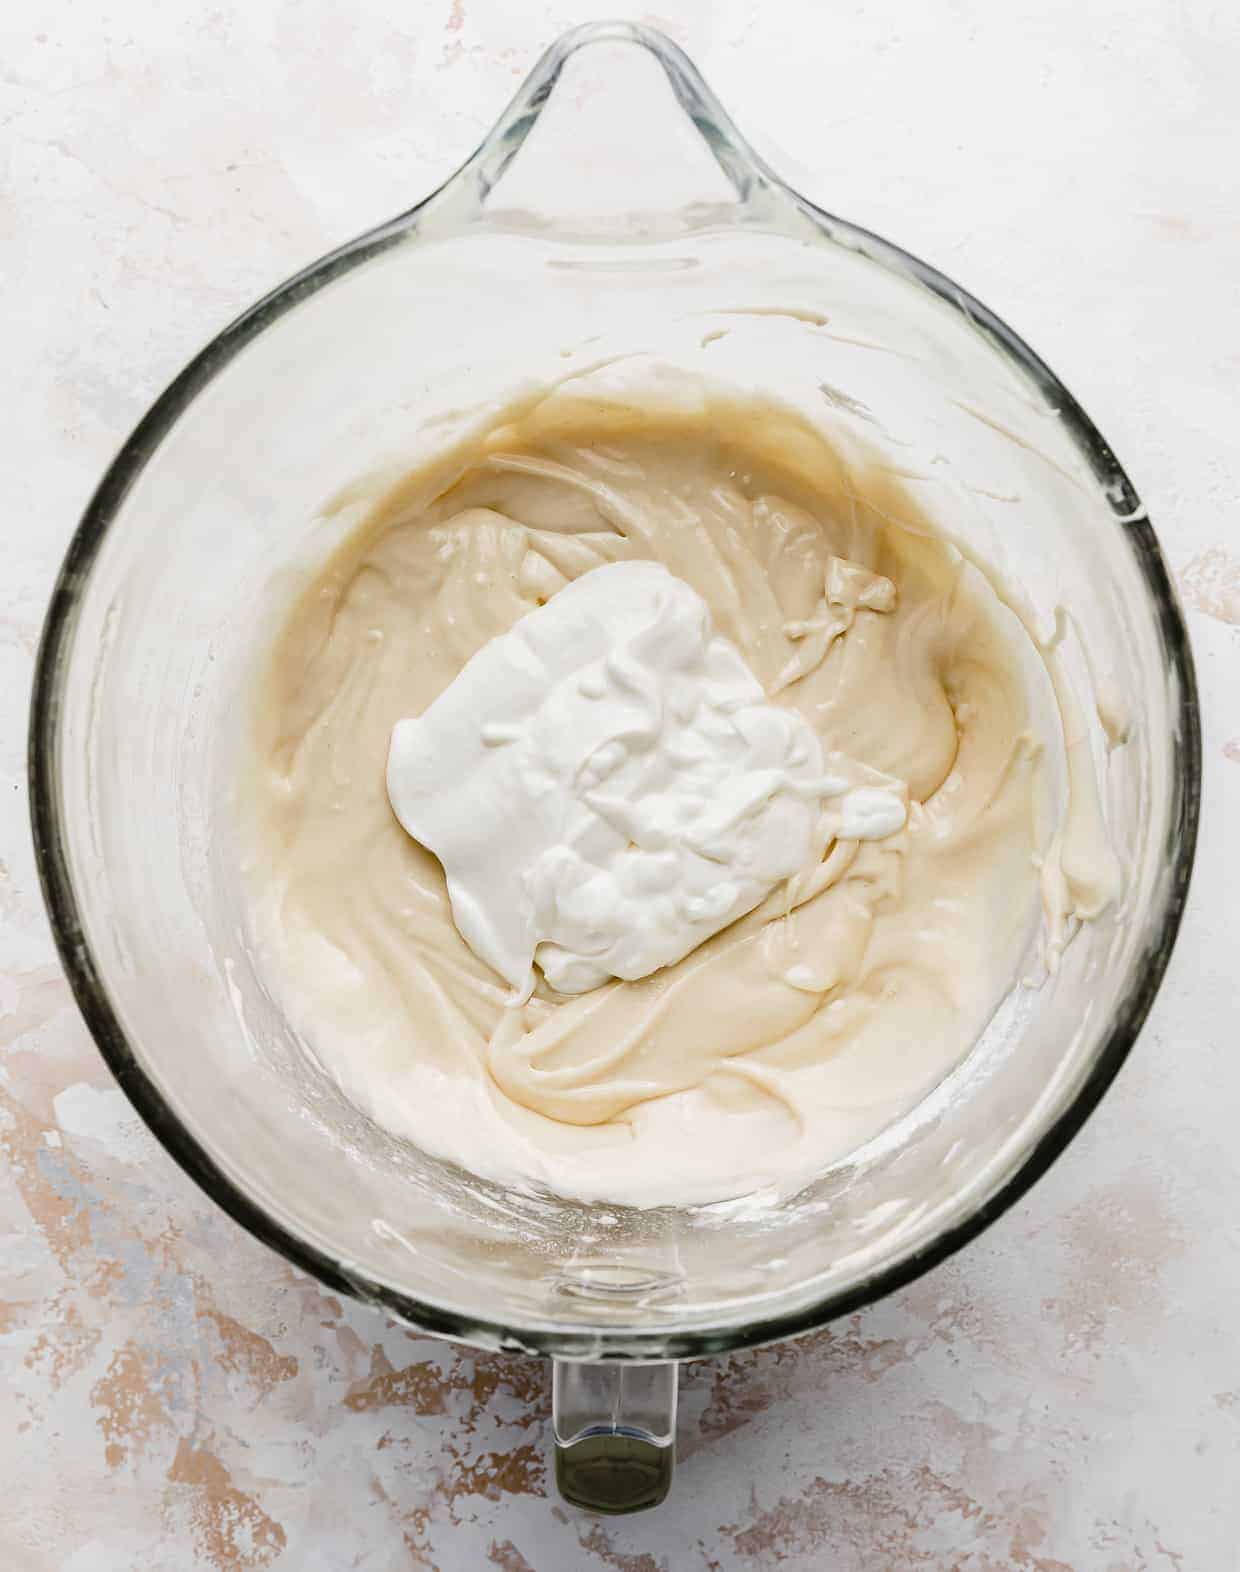 A glob of sour cream atop cake batter in a glass bowl.